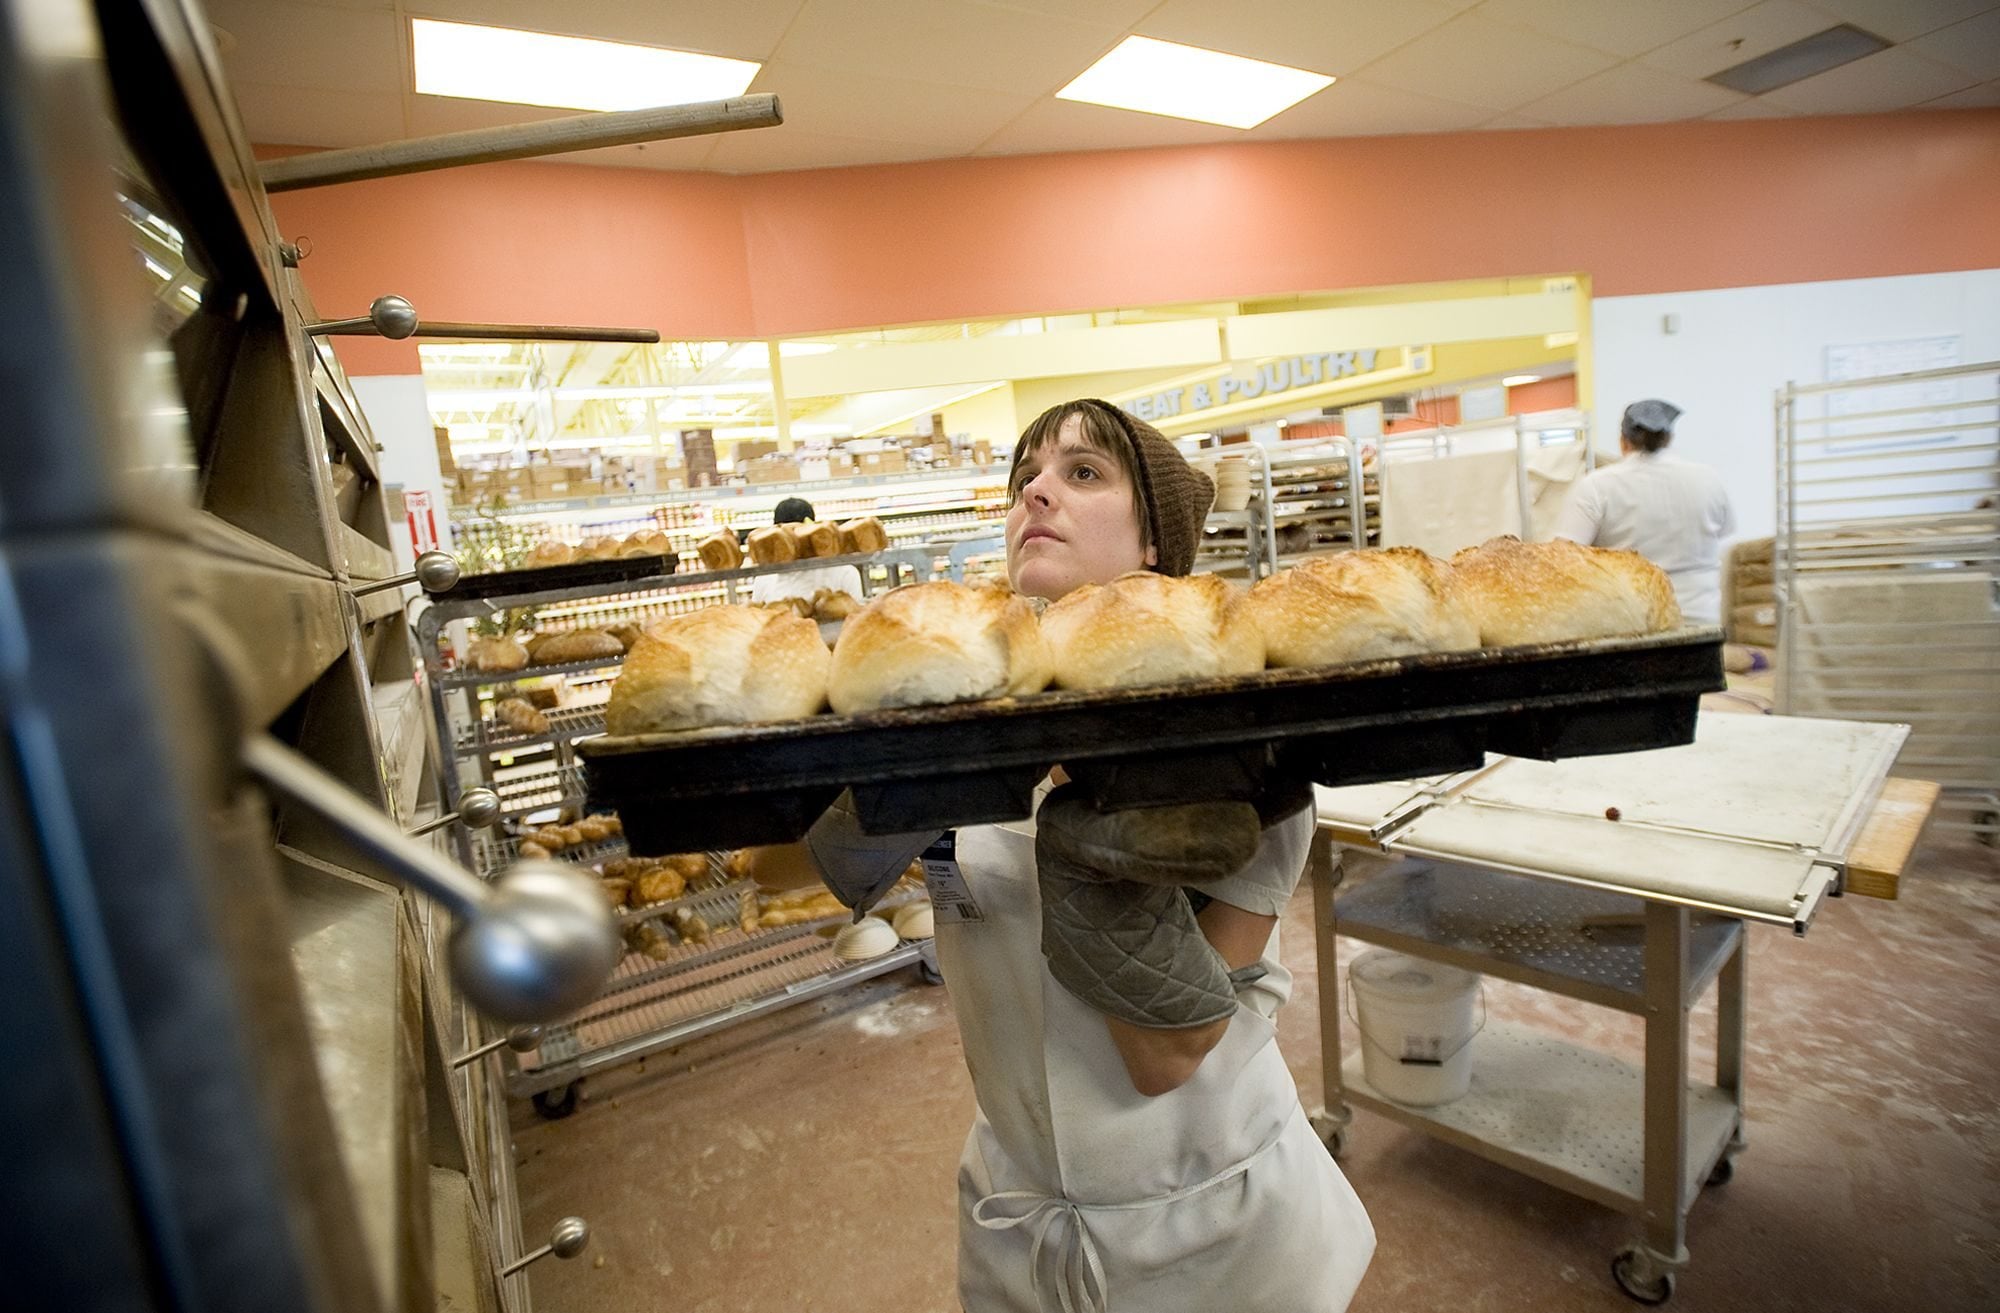 Lauren LaMotte, 30, from Portland, pulls bread from the oven Tuesday at the North Interstate New Seasons in Portland.